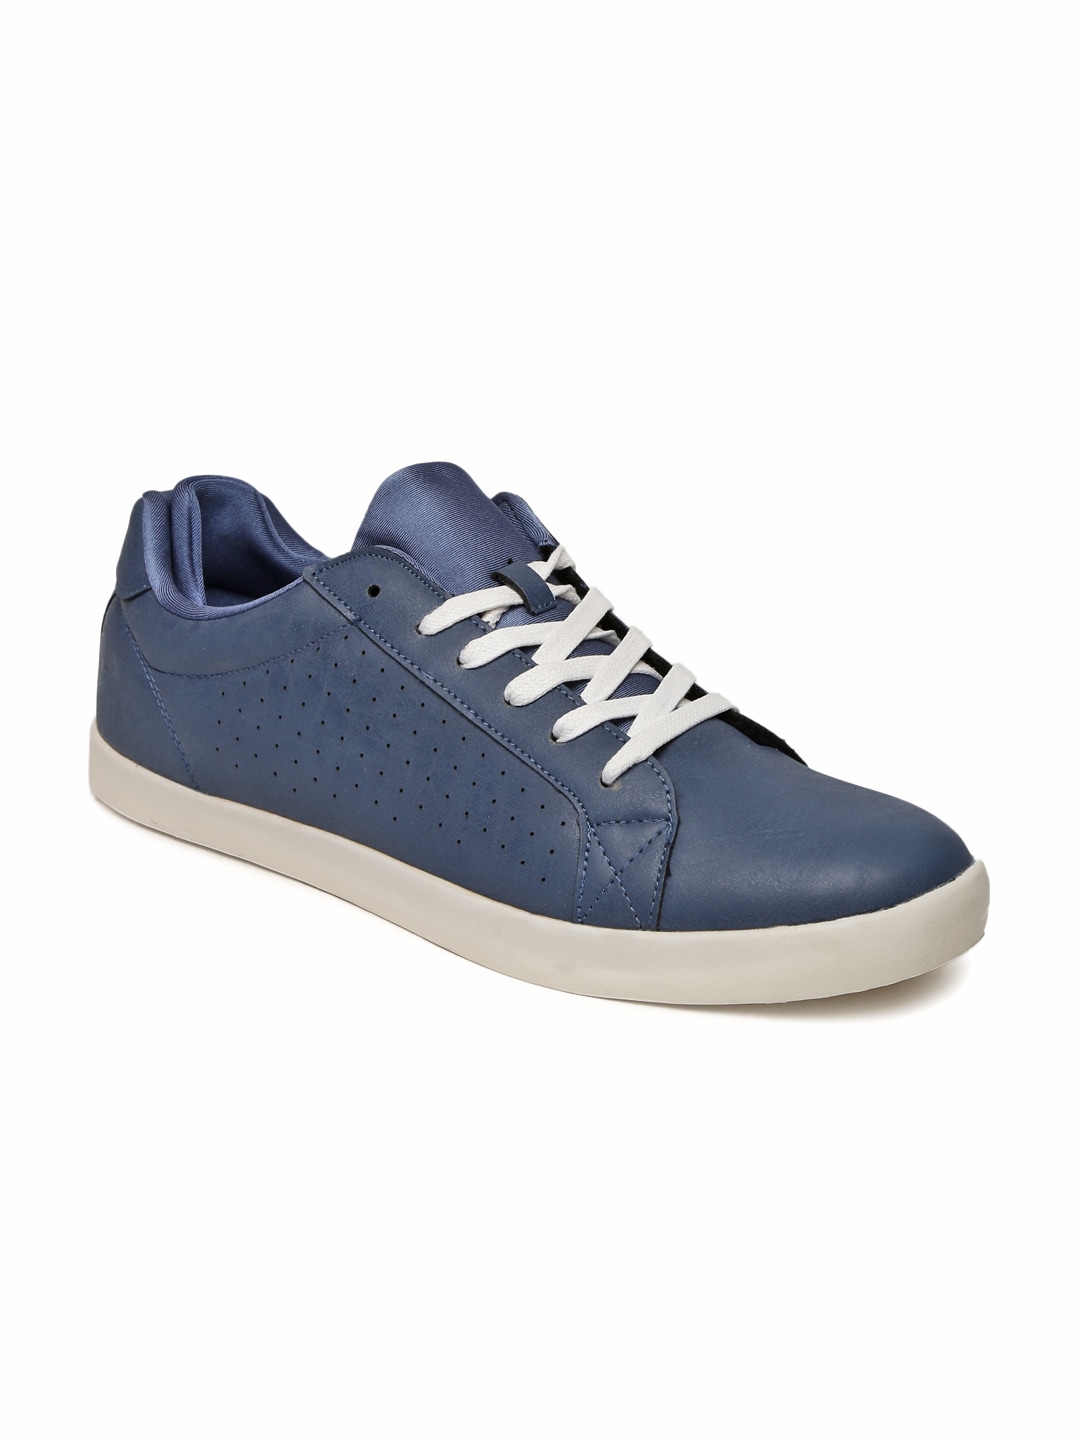 Buy FORCA by Lifestyle Men Blue Synthetic Solid Shoes at Amazon.in